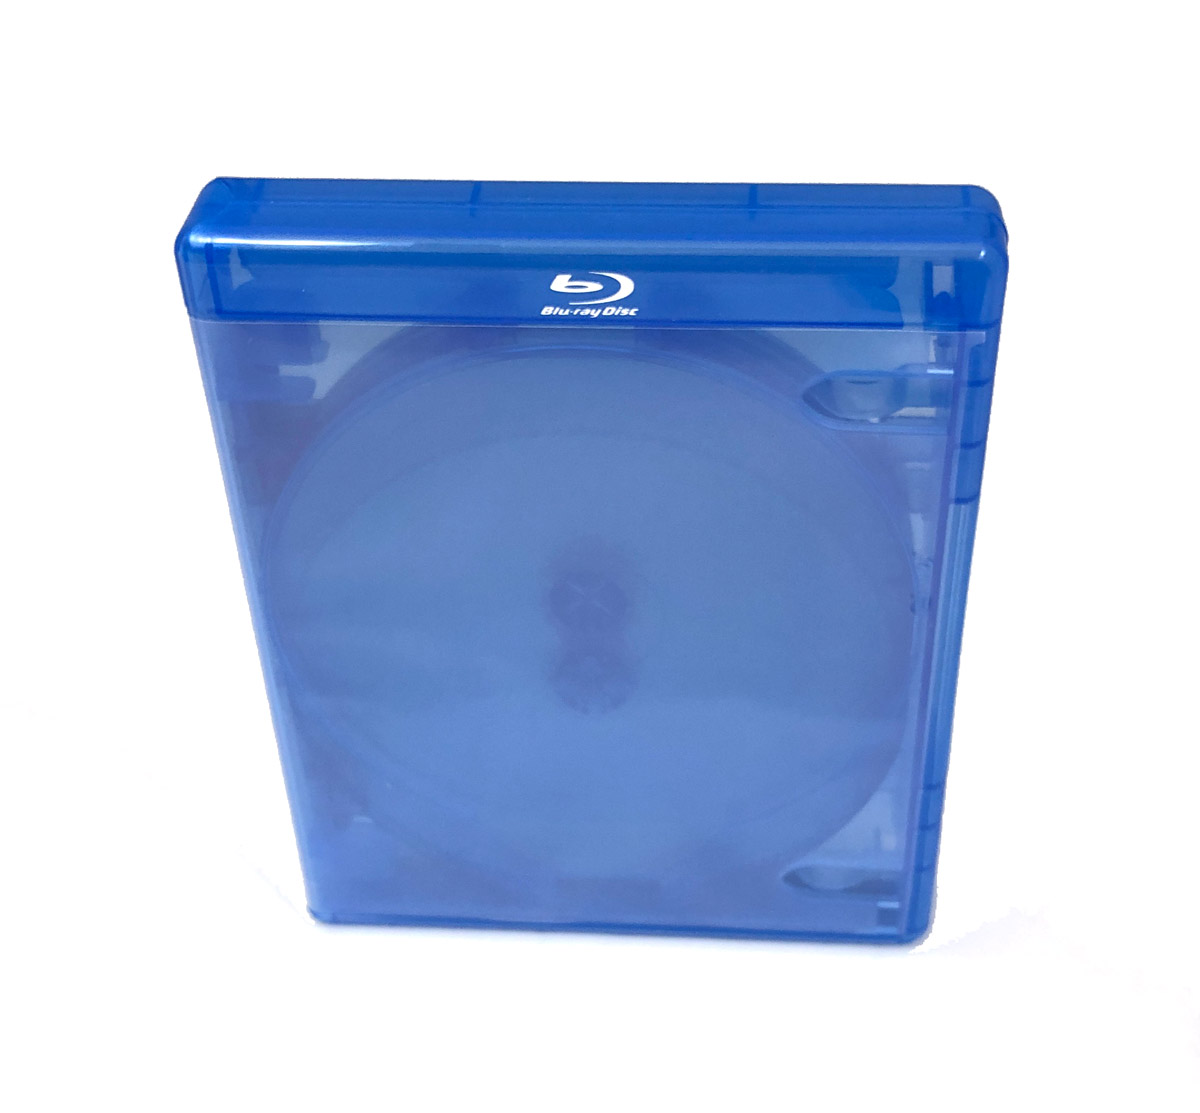 Elite BLU-RAY Octuple (8 Disc) Case - Blu-ray Cases - Media Packaging -  Duplication.com